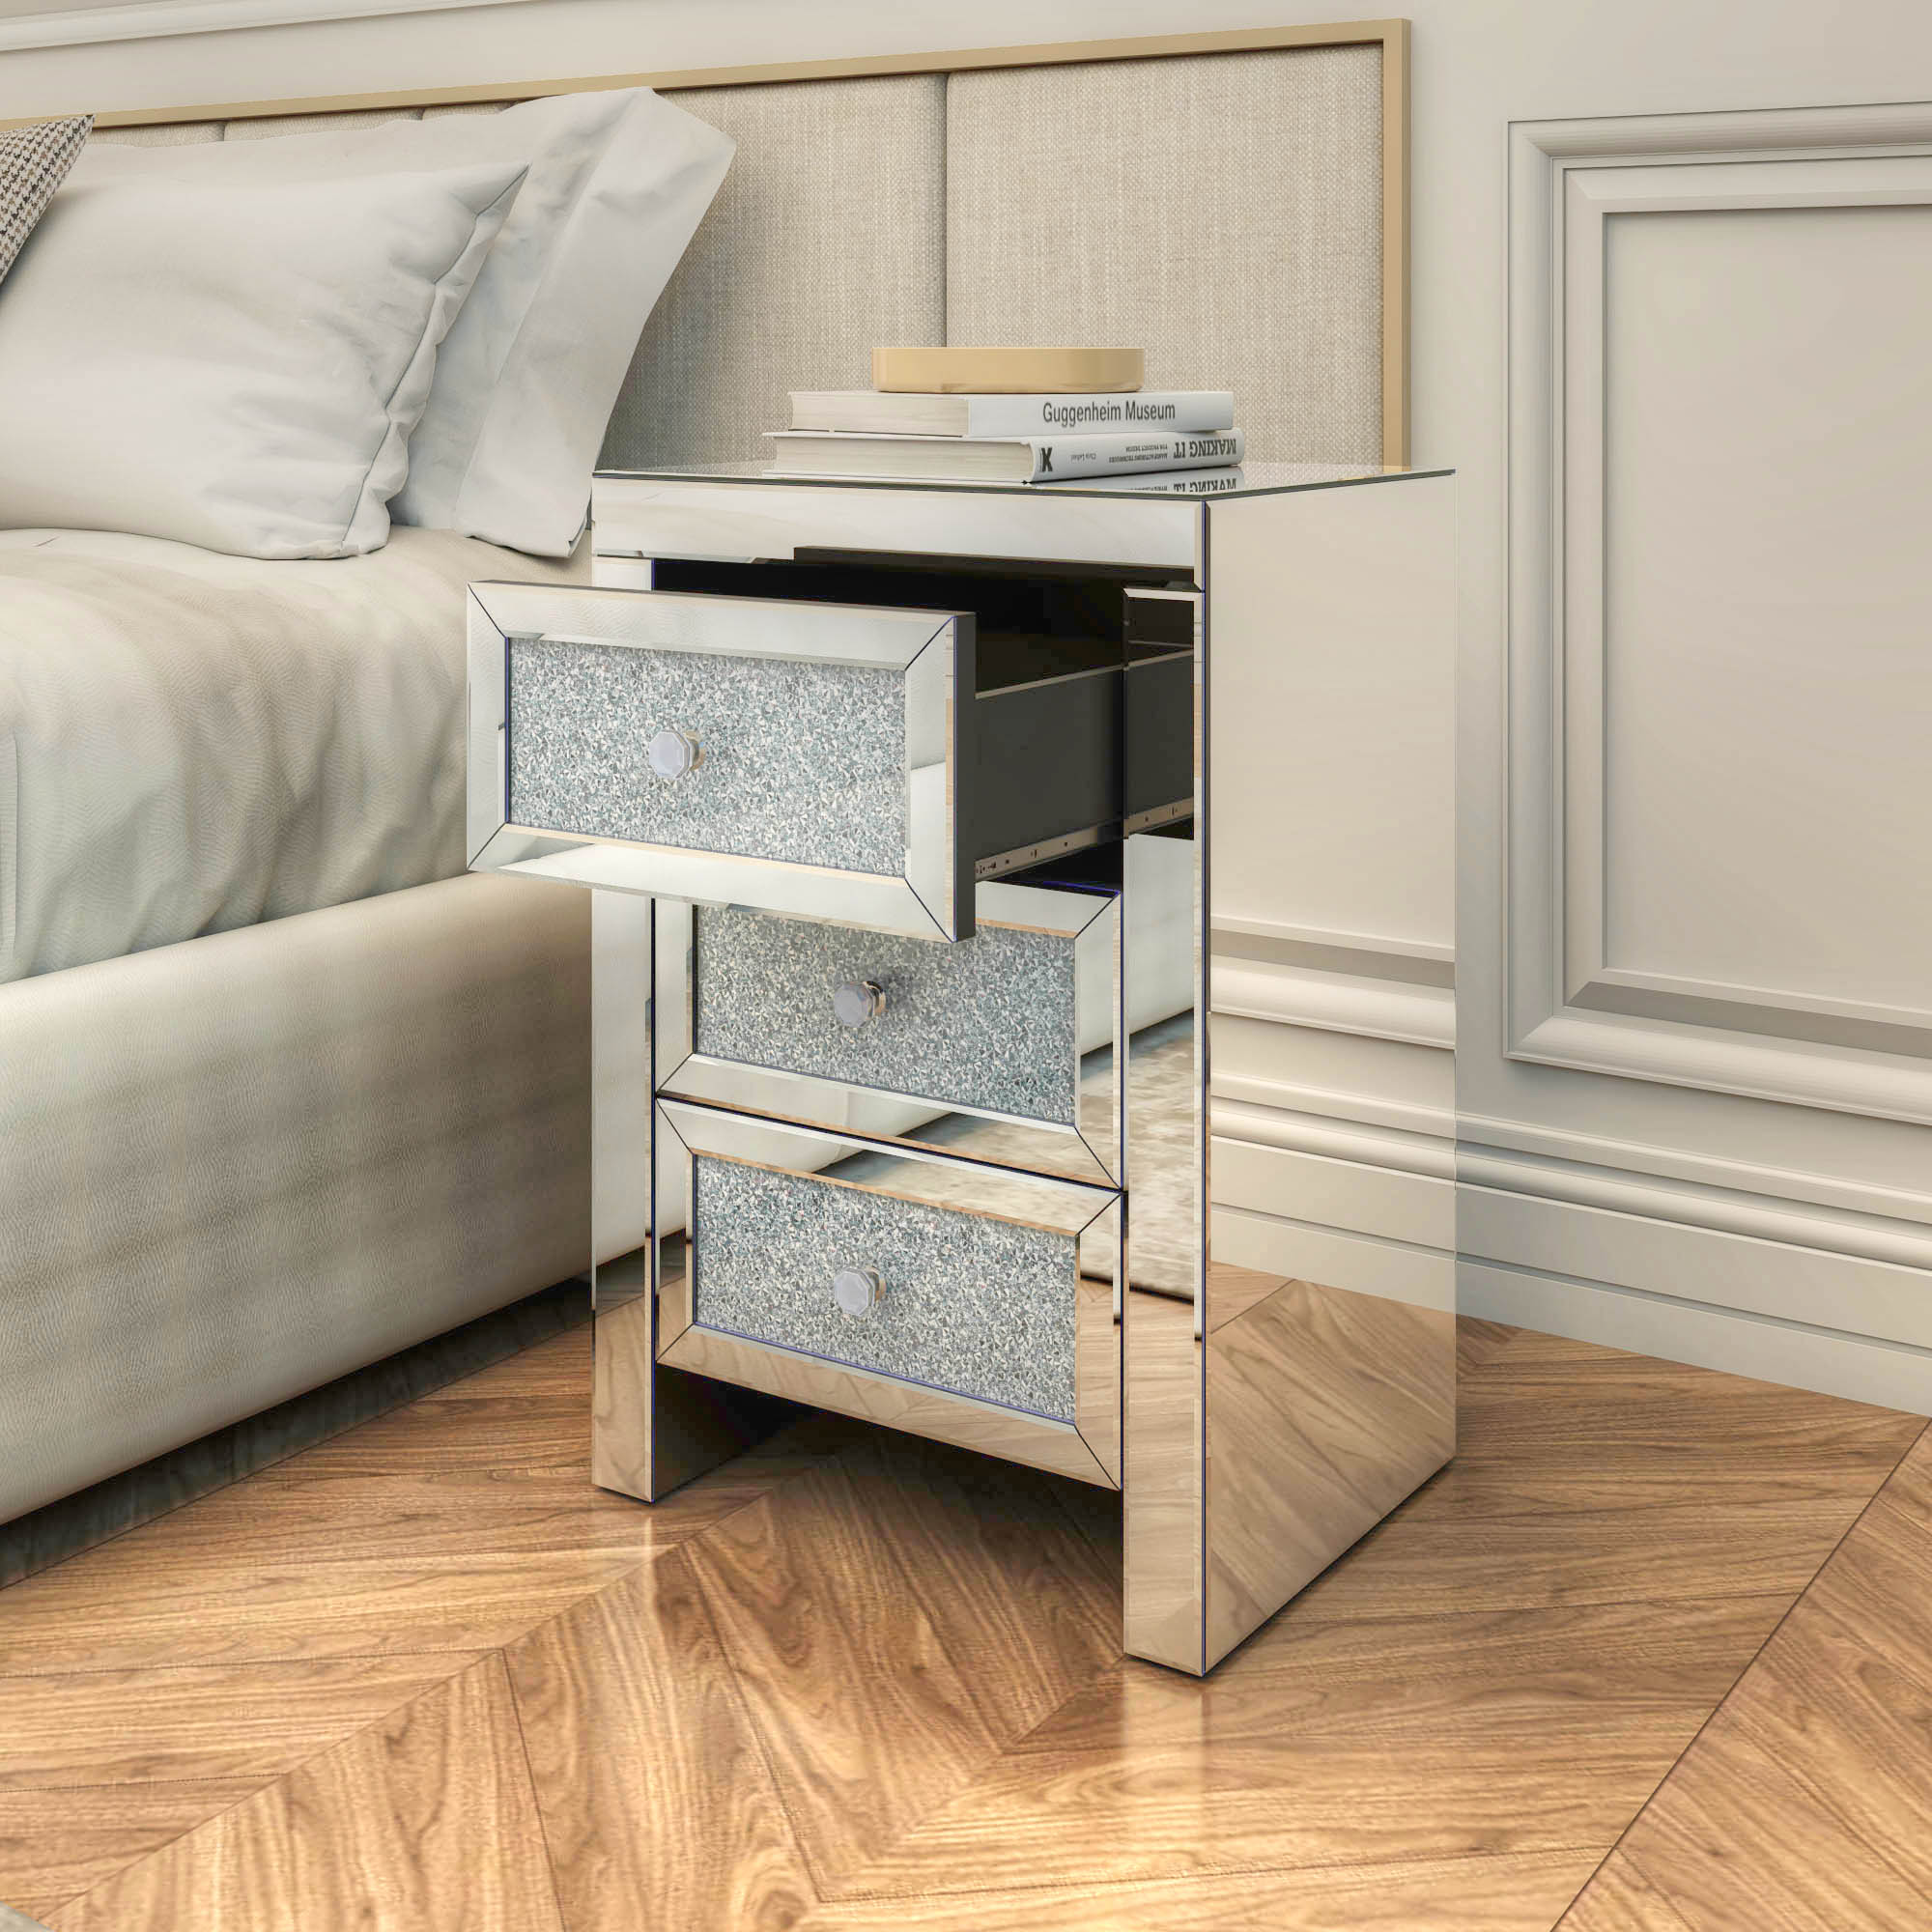 Mirrored Night Stand Bedside Tables Drawer Crystal Diamond Bedside Table Bedroom Furniture with 3-Drawers-Bedside Storage Cabinet Silvery